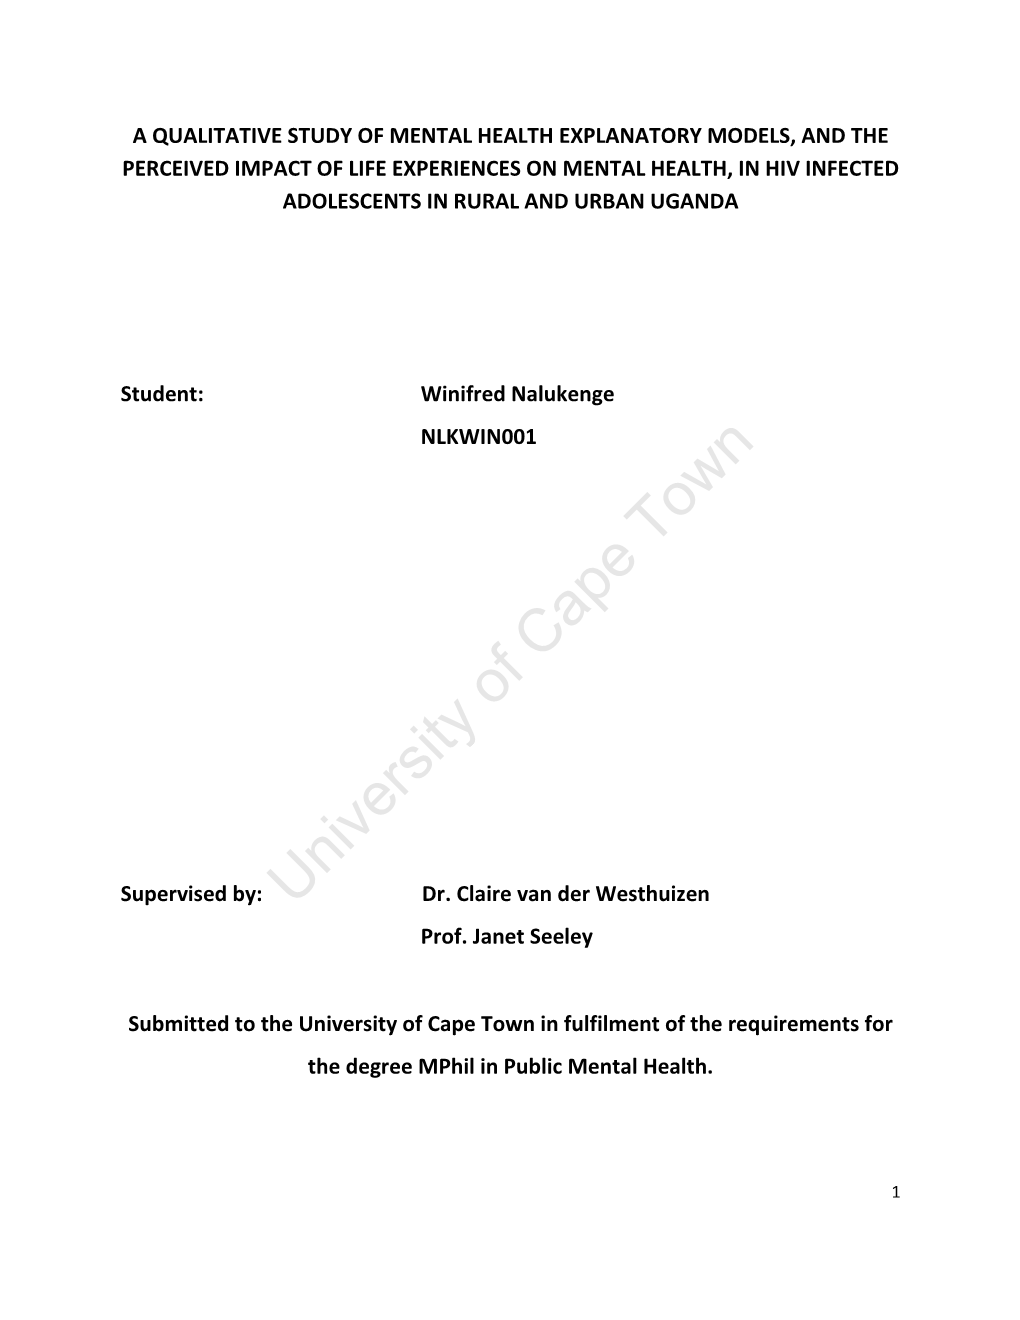 A Qualitative Study of Mental Health Explanatory Models, and The